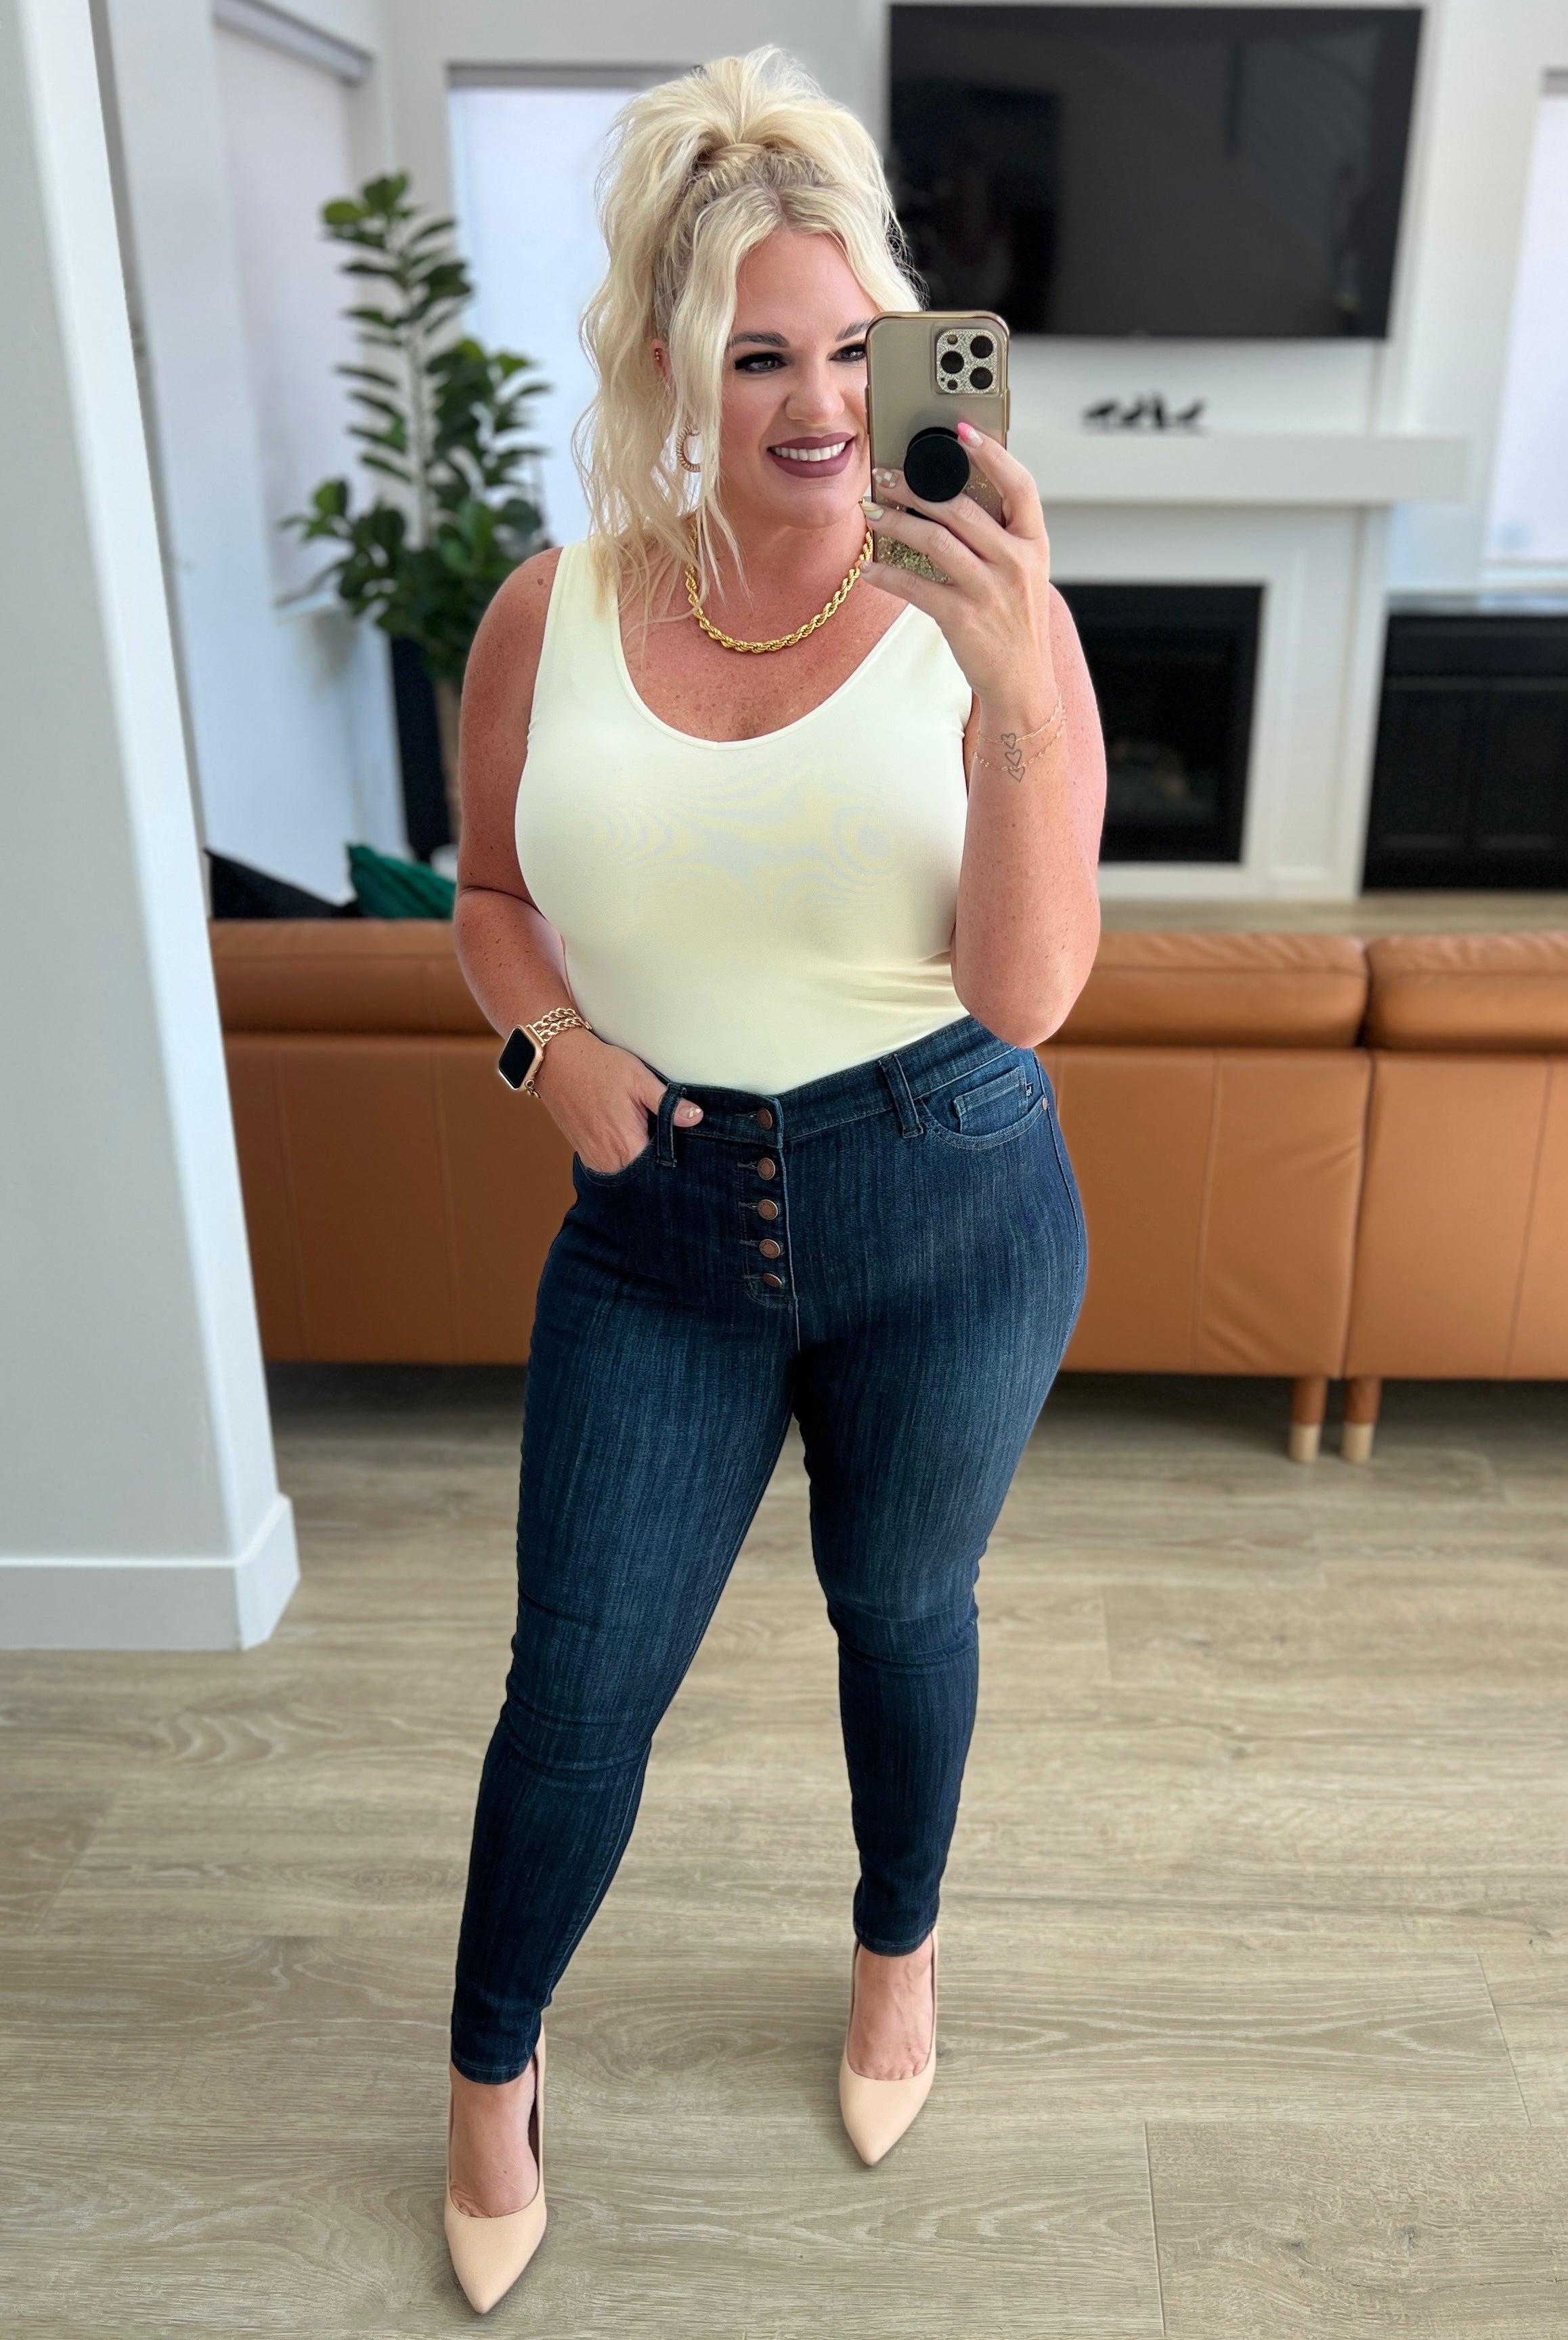 Celecia High Waist Hand Sanded Resin Skinny Jeans-Pants- Simply Simpson's Boutique is a Women's Online Fashion Boutique Located in Jupiter, Florida